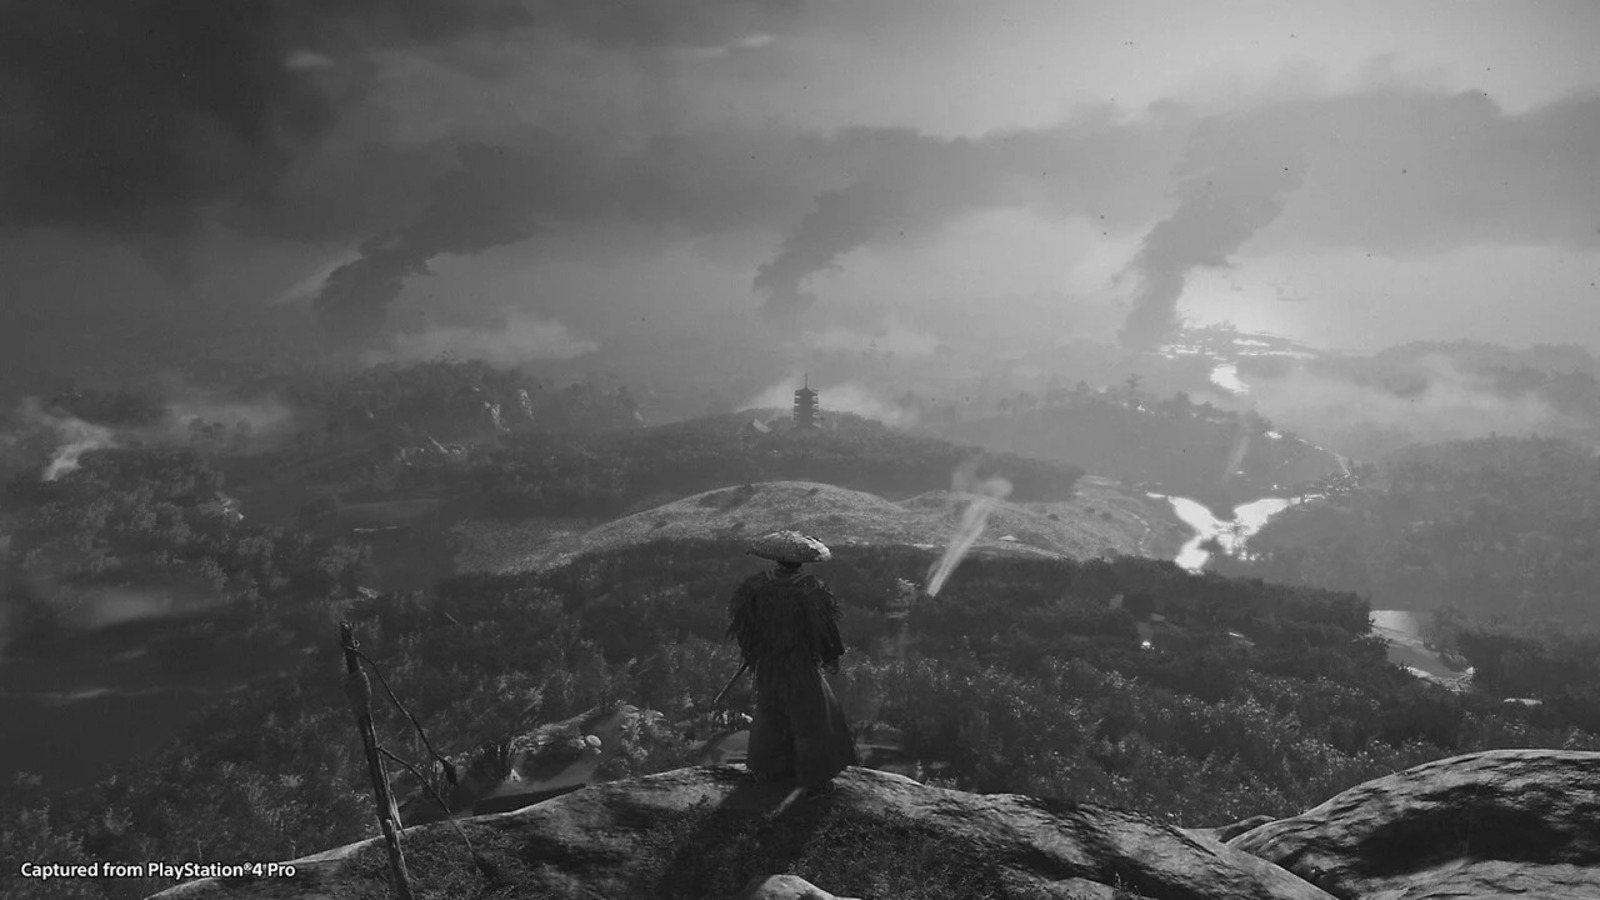 Ghost of Tsushima, Chad Stahelski's film will have a black and white version?